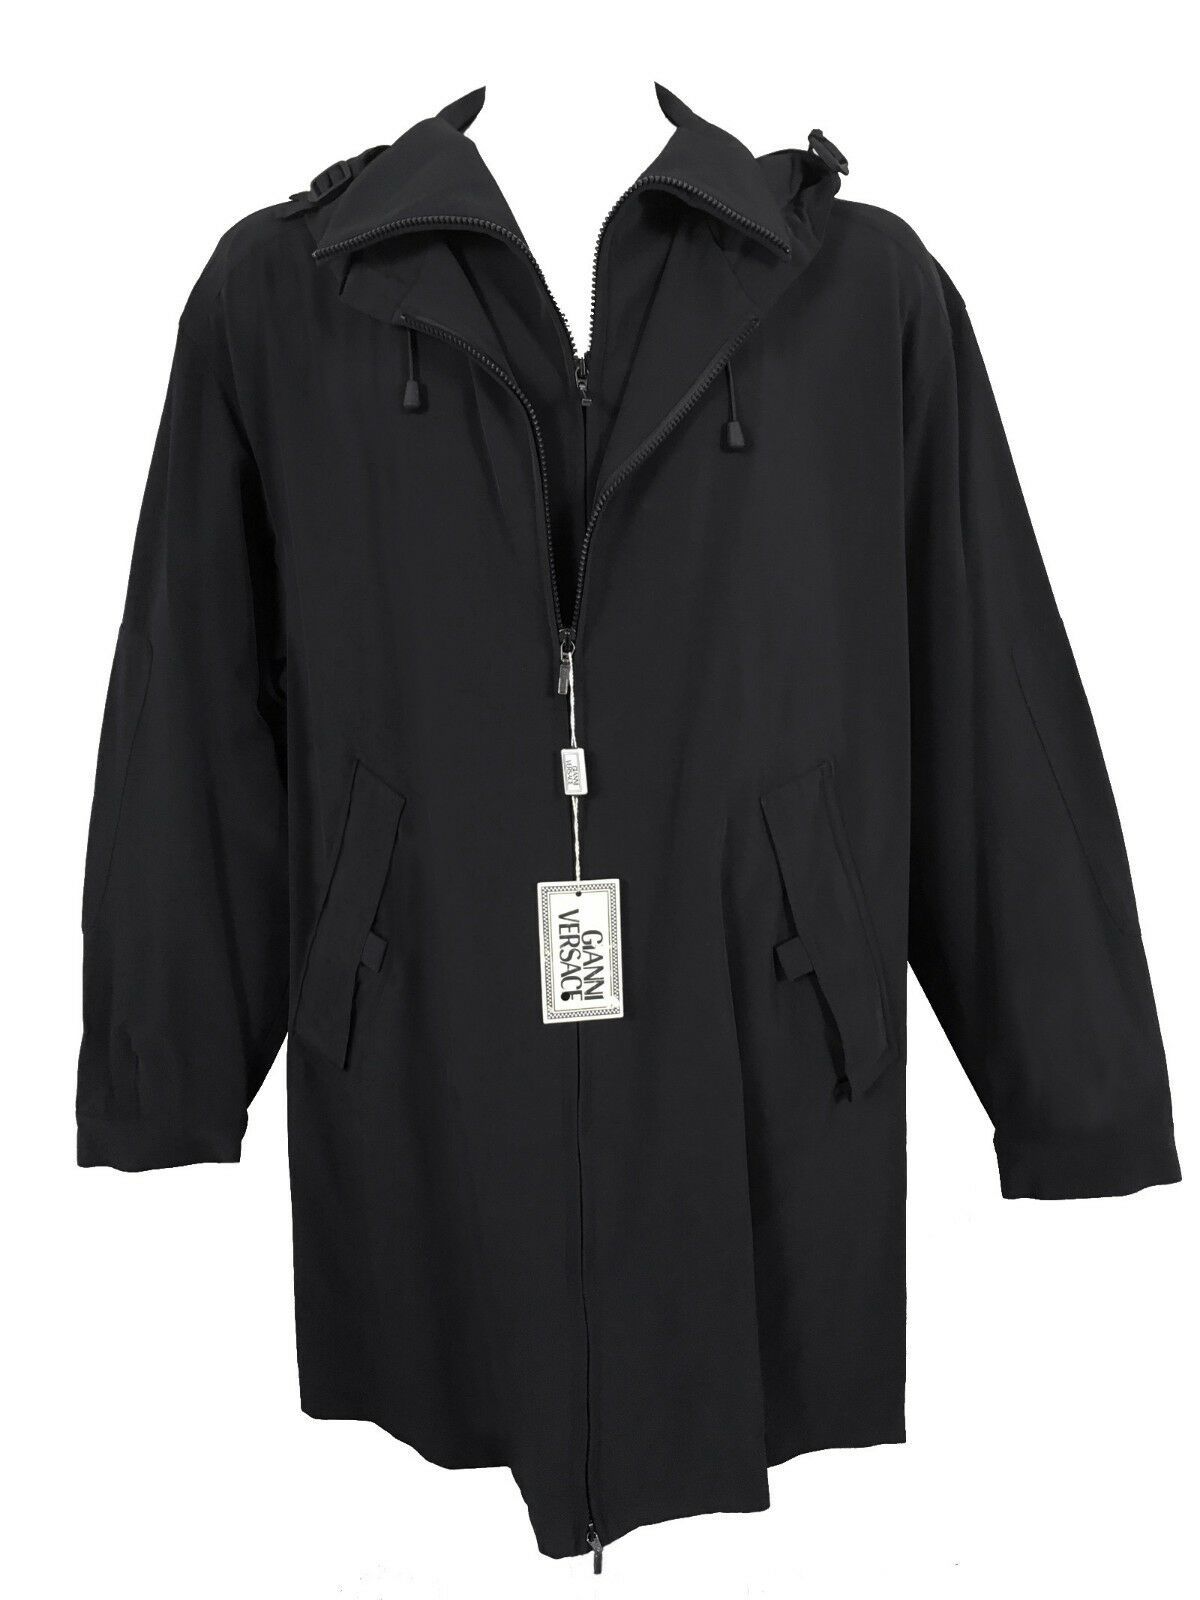 NEW Vintage 90'S Gianni Versace Hooded Overcoat!  e 56  Approx XXL  *VERY ROOMY* - $1,099.99